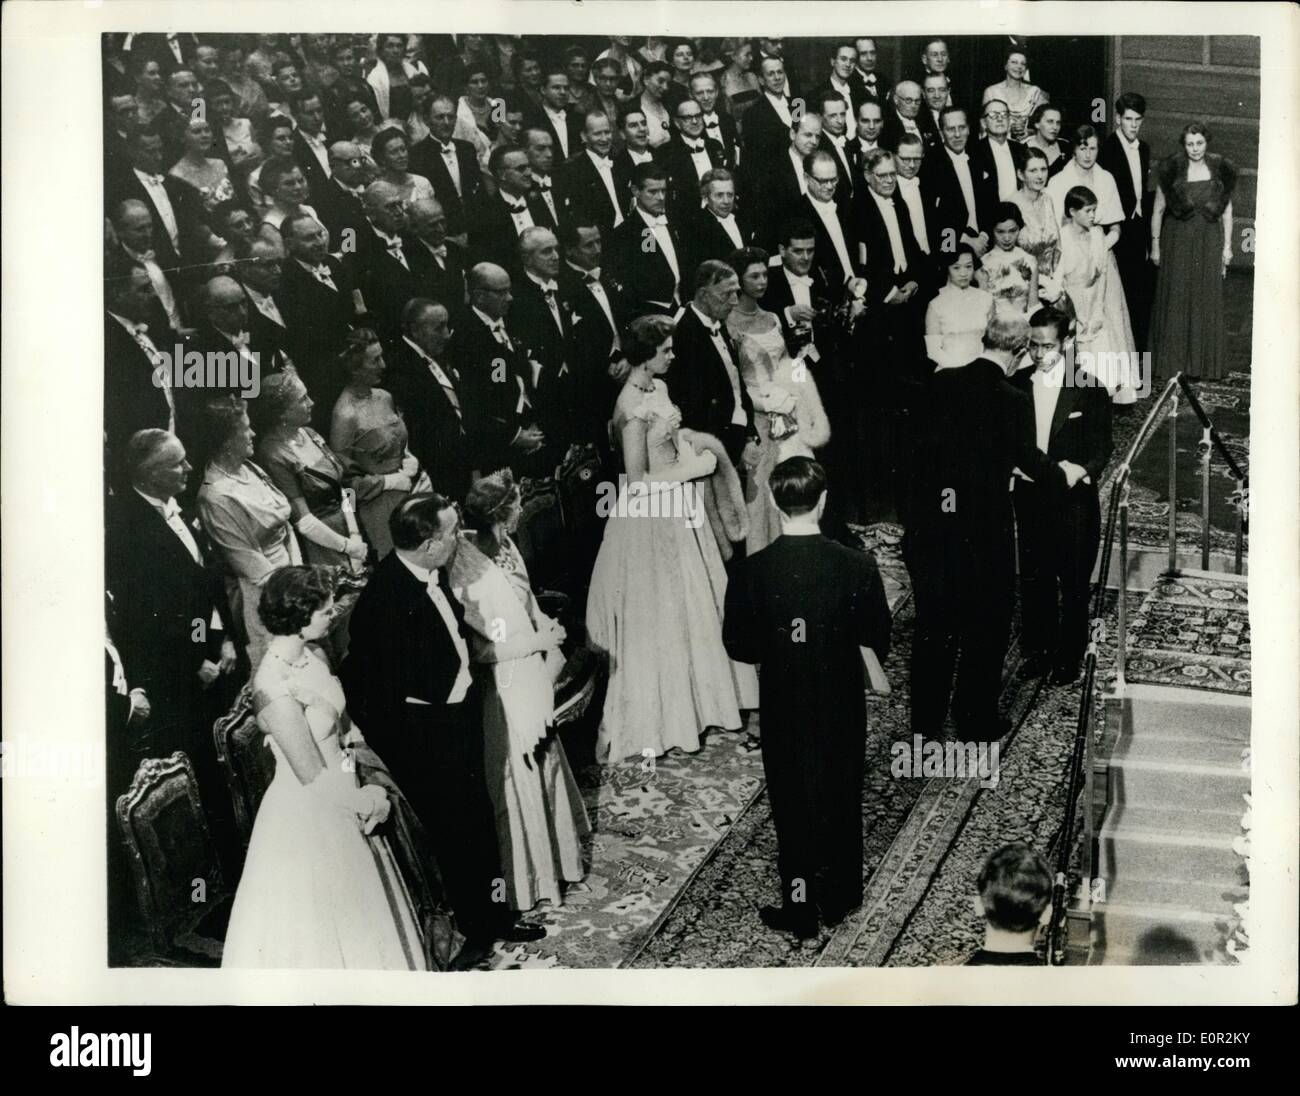 Dec. 12, 1957 - Nobel Prize Germany. The Nobel Prize winners received their awards from King Gustav of Sweden, at the Concert Hall in Stockholm. The ceremony was followed by the traditional banquet in the Town Hall. Keystone Photo Shows:- King Gustav seen on right presenting Professor Tsung Dao Lee, who shared the Nobel Prize for Physics with Professor Chen Ning Yang (seen in foreground, back to camera), with his award. Prof. Ning Yang had just received his. Looking on, in first row, are: Princess Birgitta; Prince Bertil, Queen Louise, Princess Margaretha, Prince Wilhelm and Princess Desiree. Stock Photo